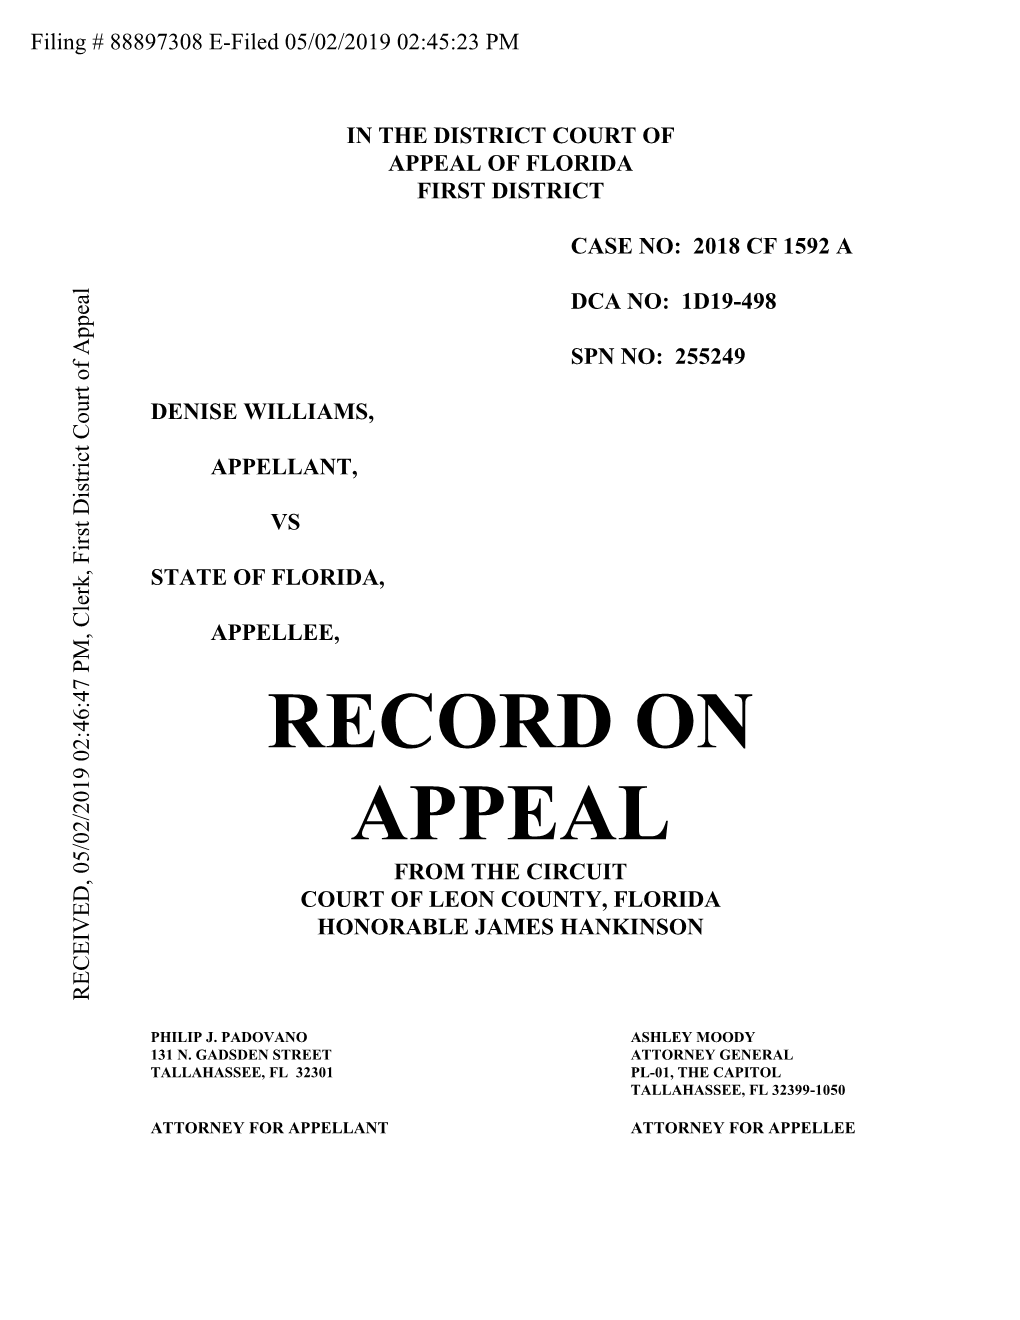 RECORD on APPEAL from the CIRCUIT COURT of LEON COUNTY, FLORIDA HONORABLE JAMES HANKINSON RECEIVED, 05/02/2019 02:46:47 PM, Clerk, First District Court of Appeal